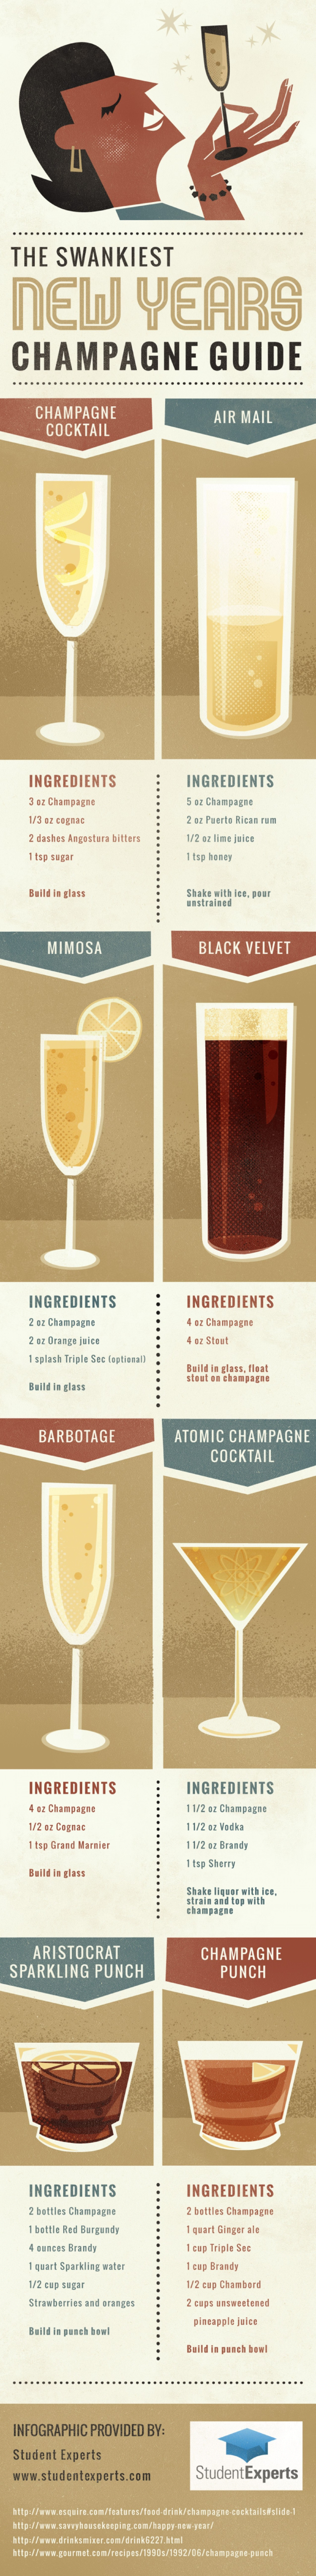 02 the-swankiest-new-years-champagne-guide_52b4b289acd05_w1500